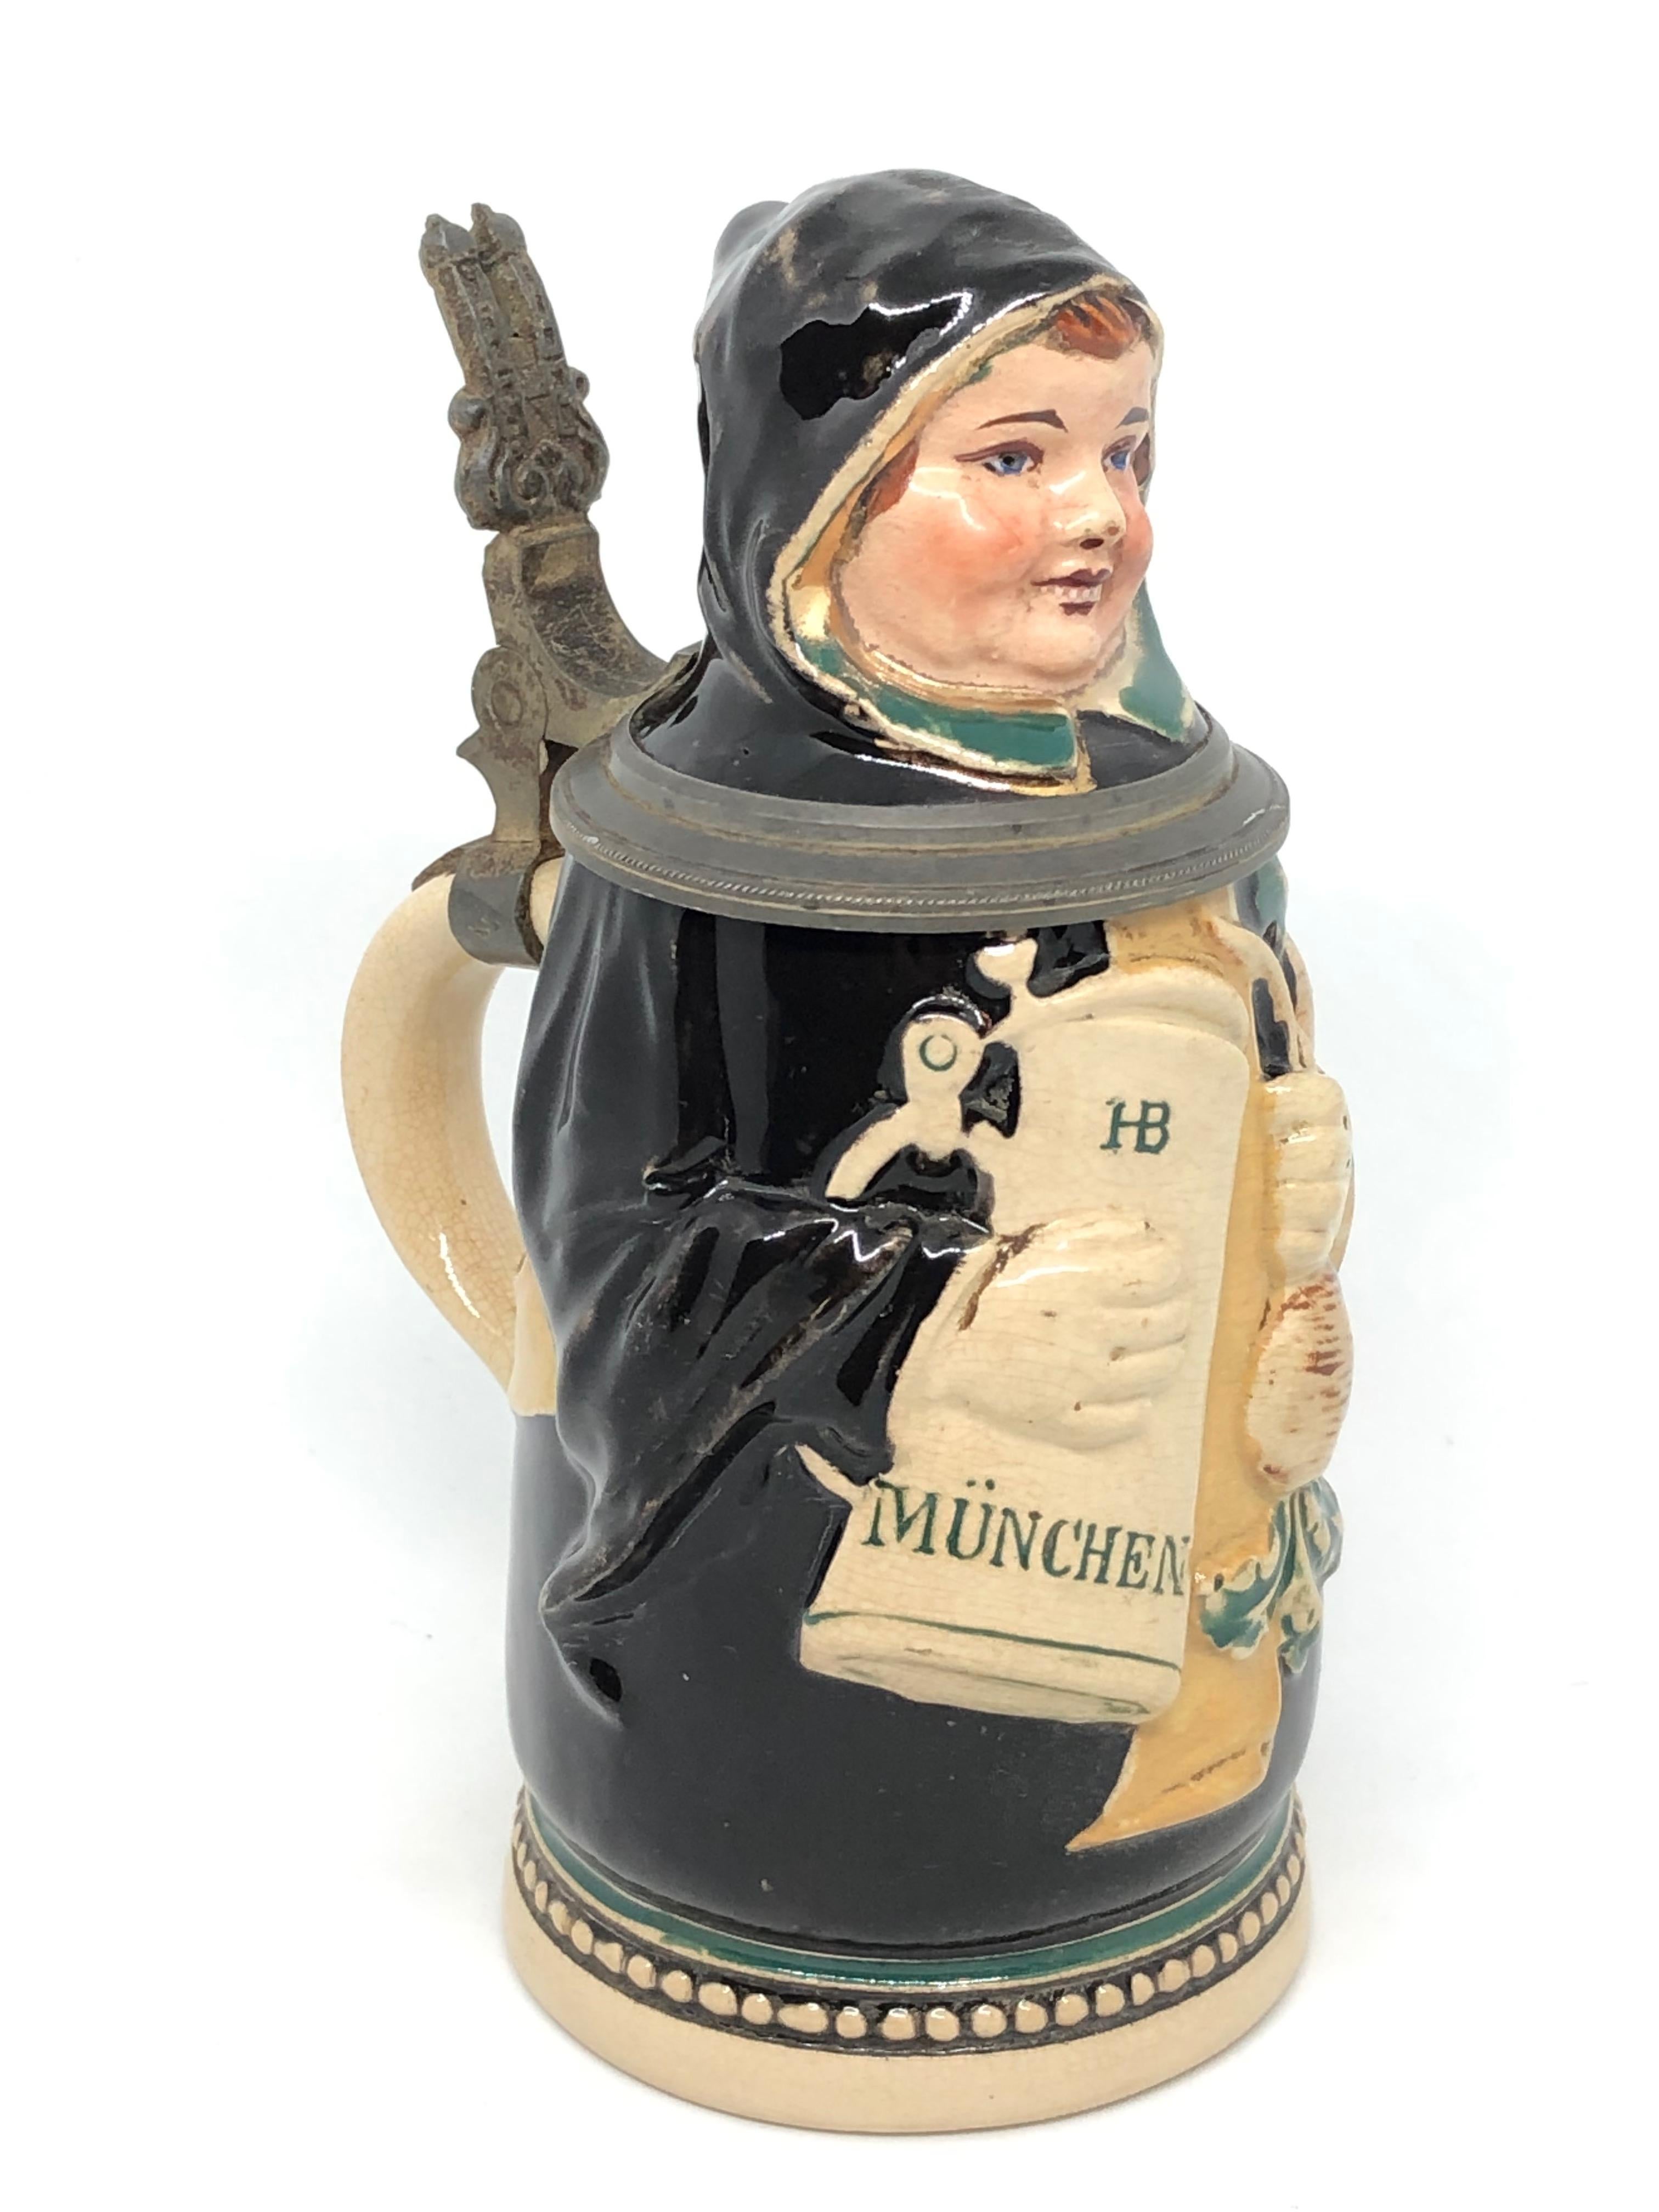 A gorgeous Character Beer Stein - Munich Child. This character beer stein has been made in Germany circa 1900s by J. Reinemann Munich. Absolutely gorgeous piece hand painted and still in great condition, without damage. Lid works properly. Marked